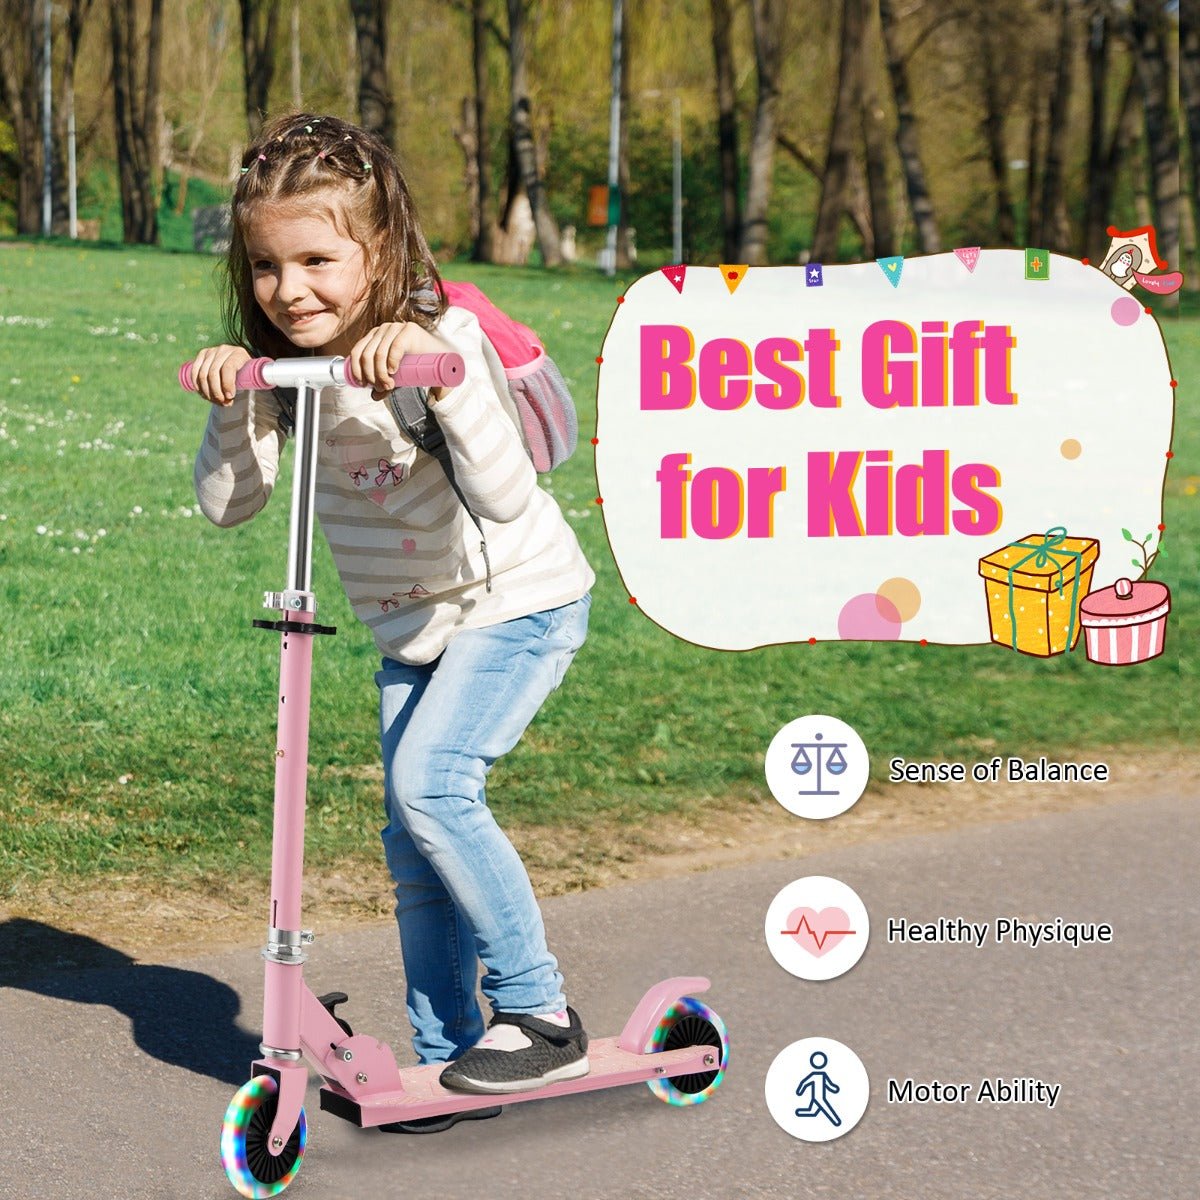 Experience Joyful Riding with a Pink Kick Scooter